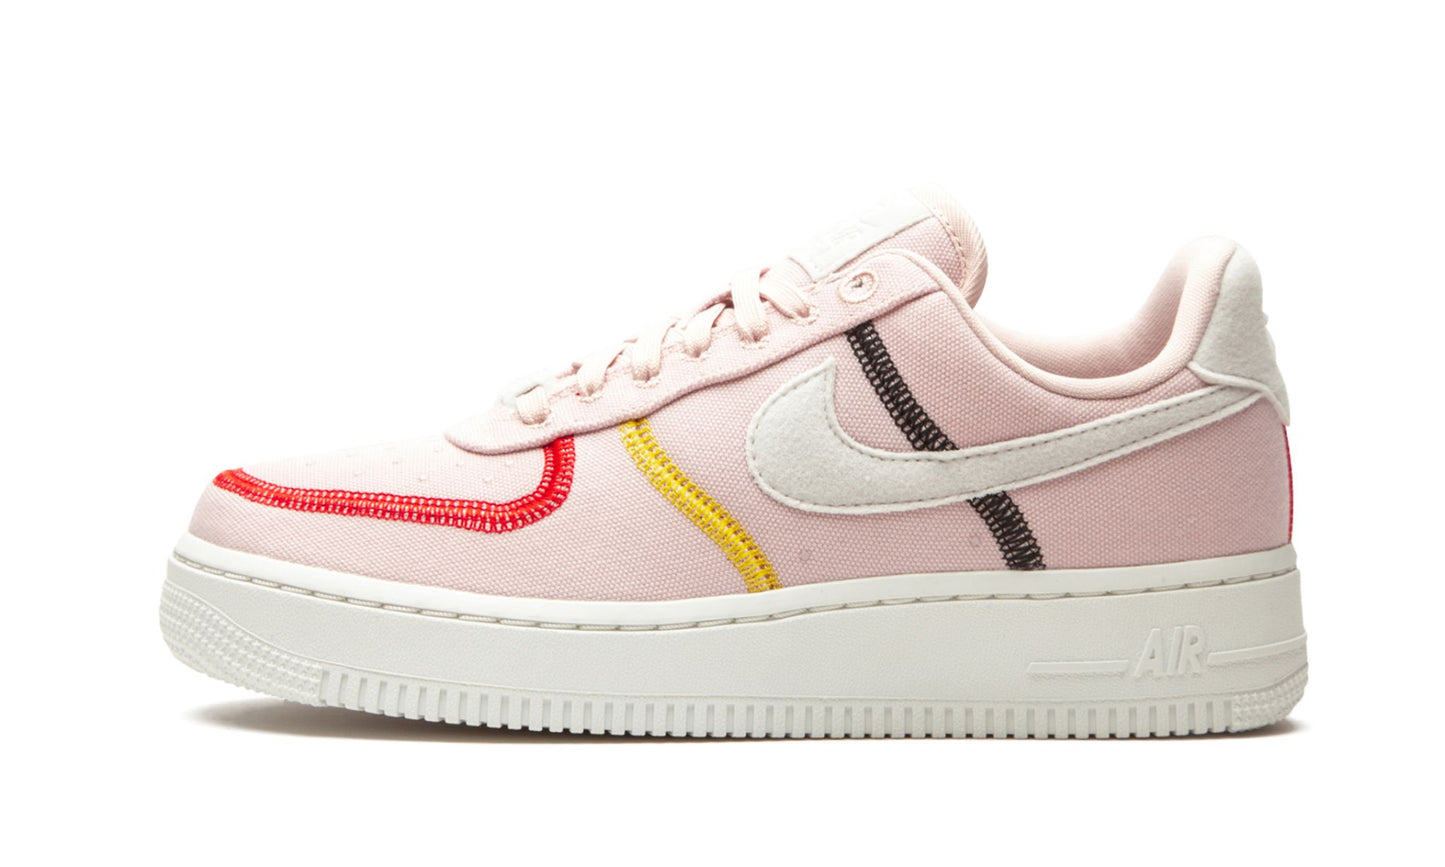 WMNS Air Force 1 "07 LX "Stitched Canvas - Silt Red"